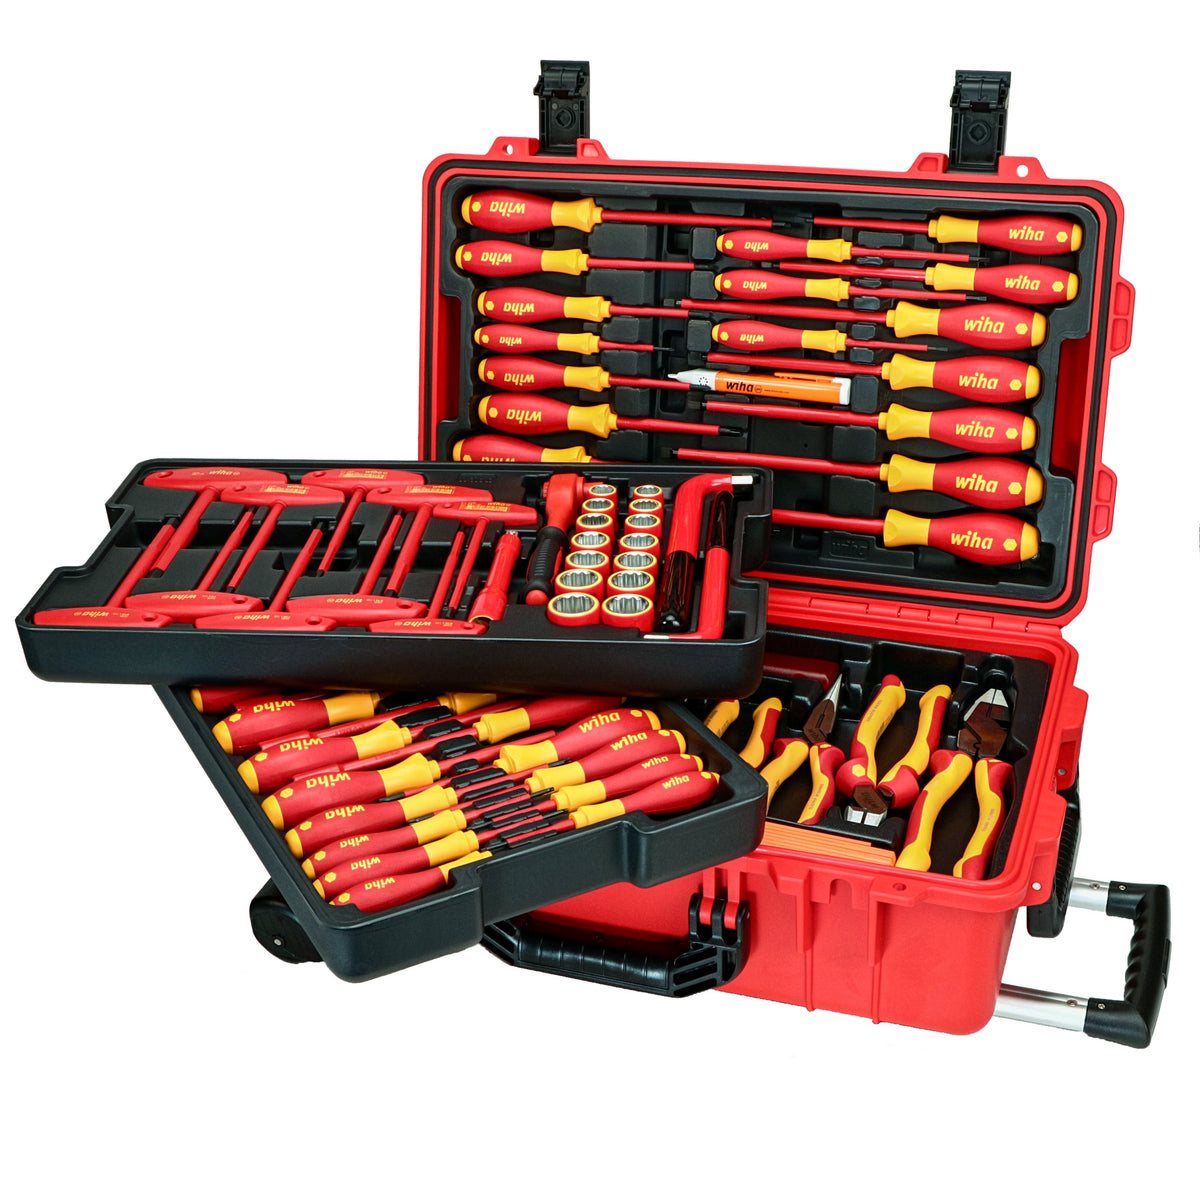 Wiha 32800 80 Piece Master Electrician's Insulated Tools Set In Rolling Hard Case